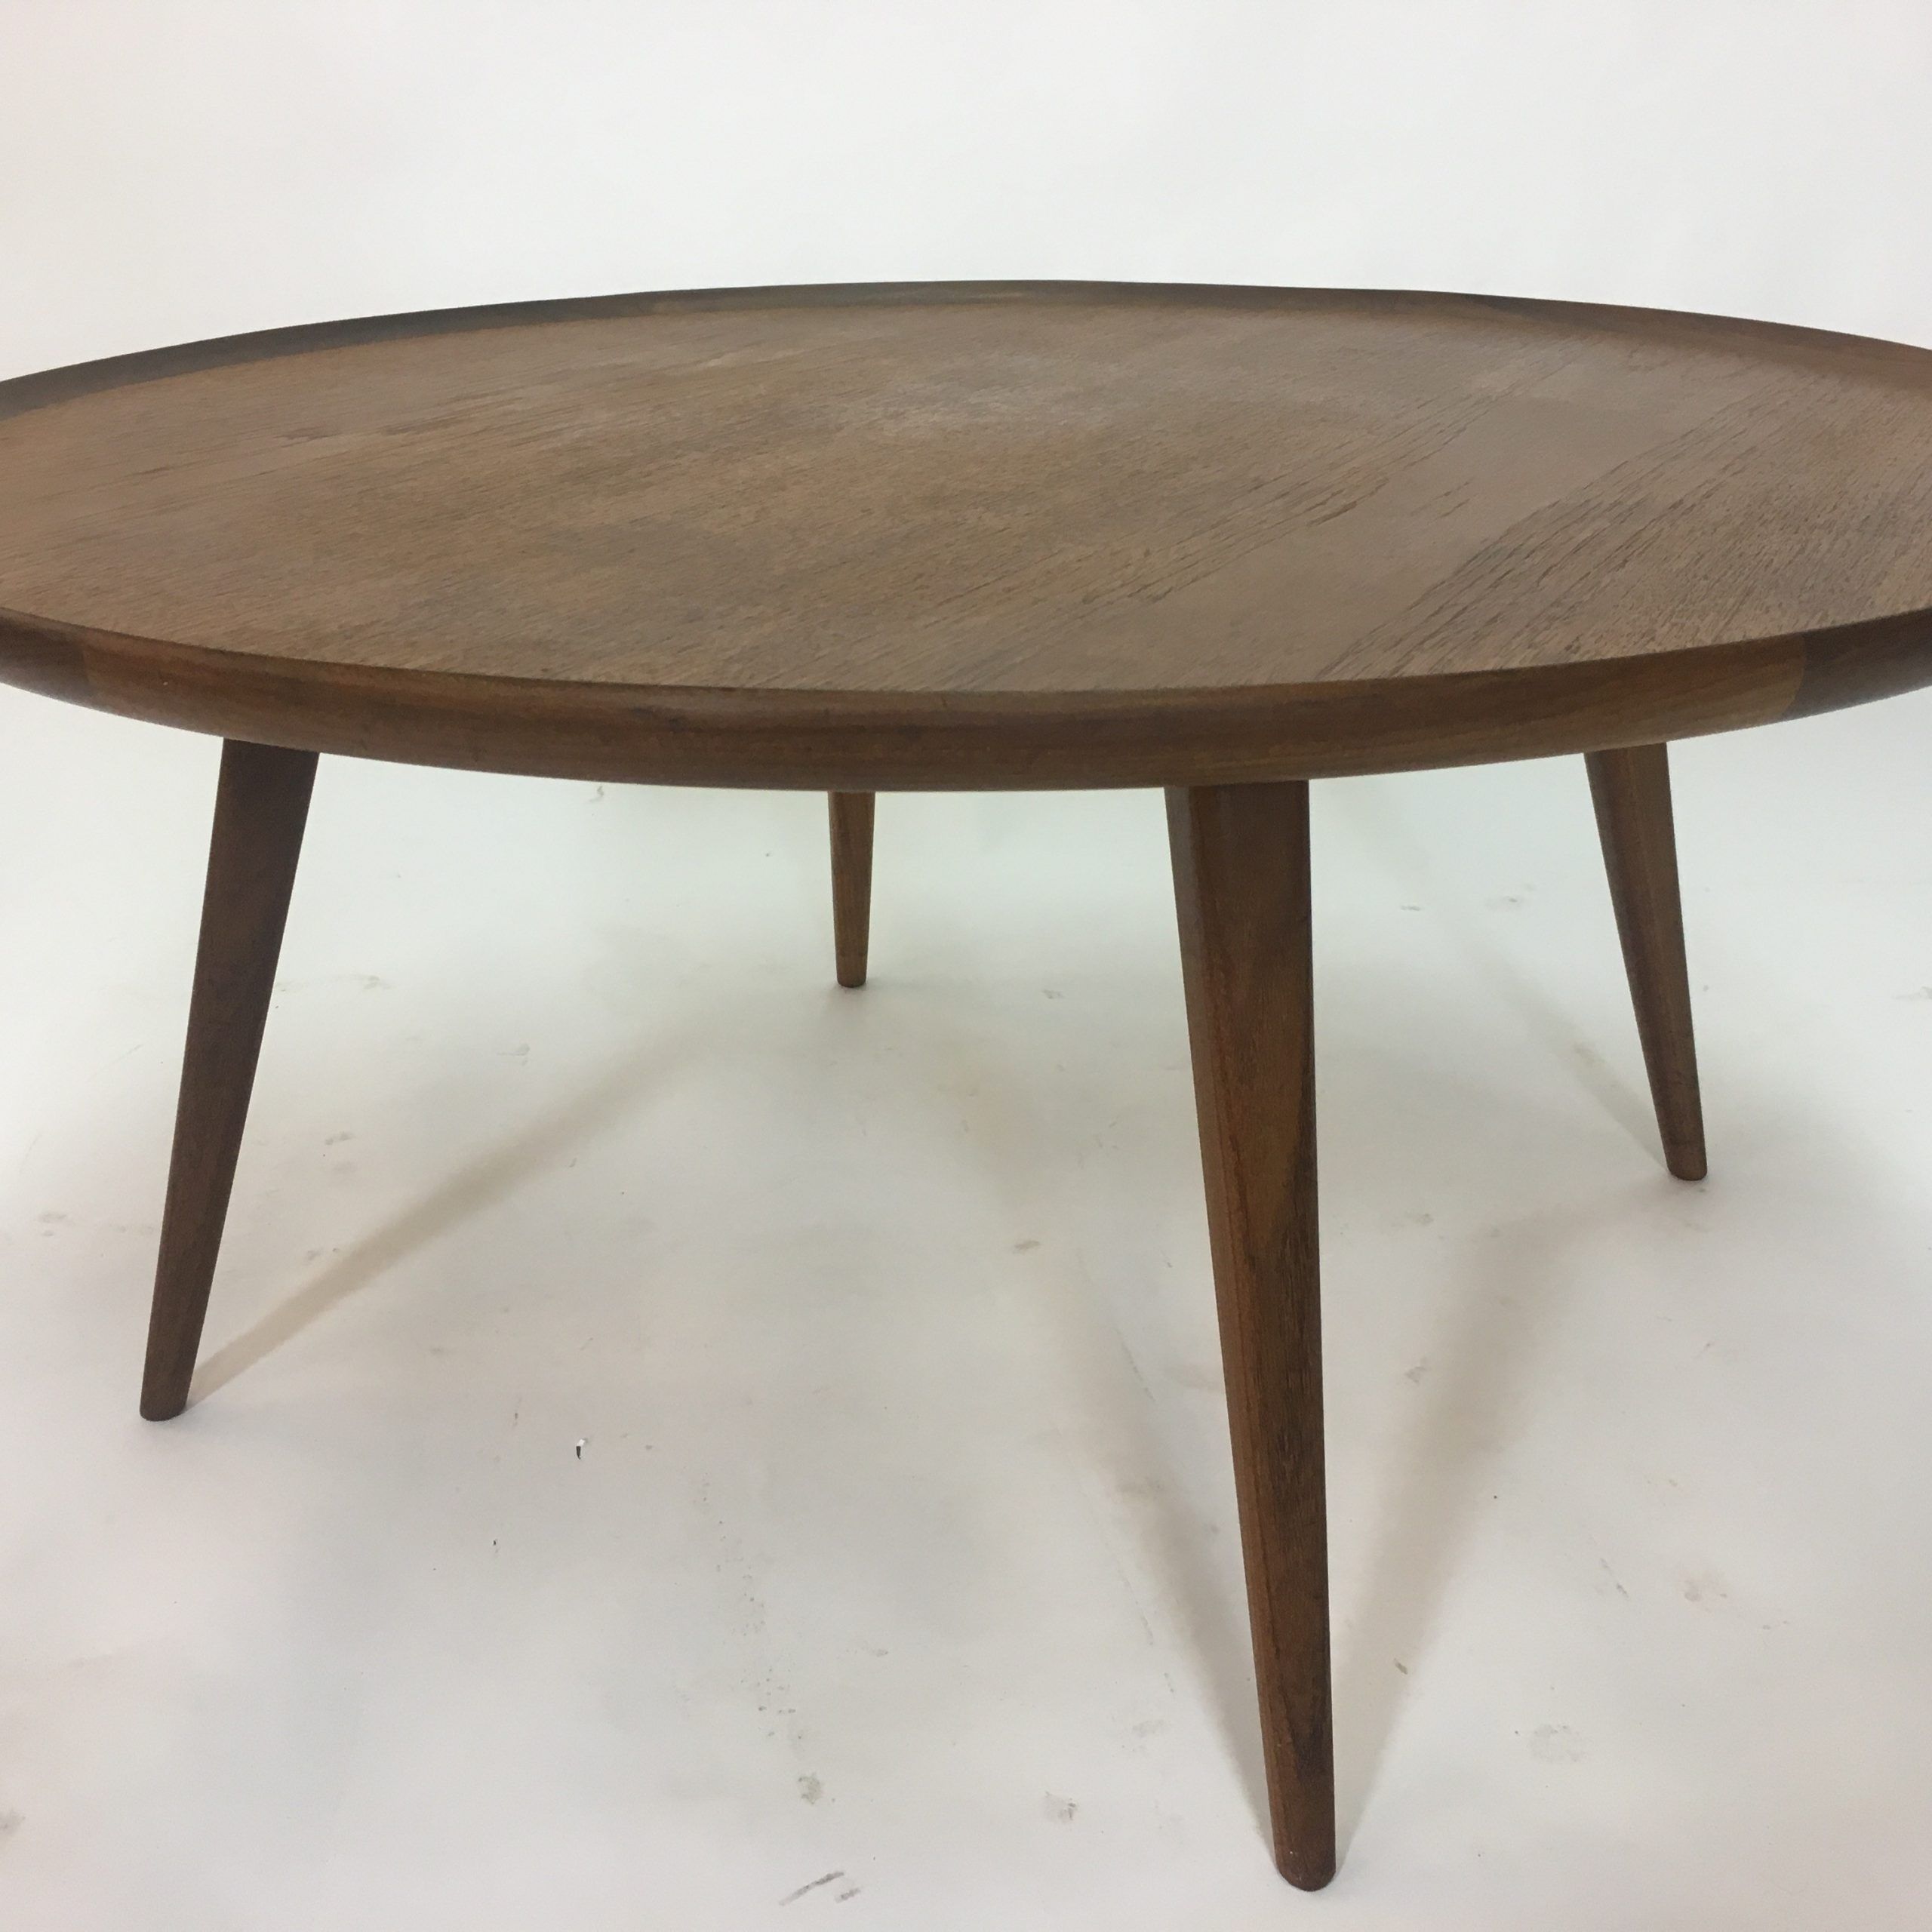 Round Coffee Tables Intended For Well Liked Vintage Round Teak Coffee Table – 1950s – Design Market (View 4 of 10)